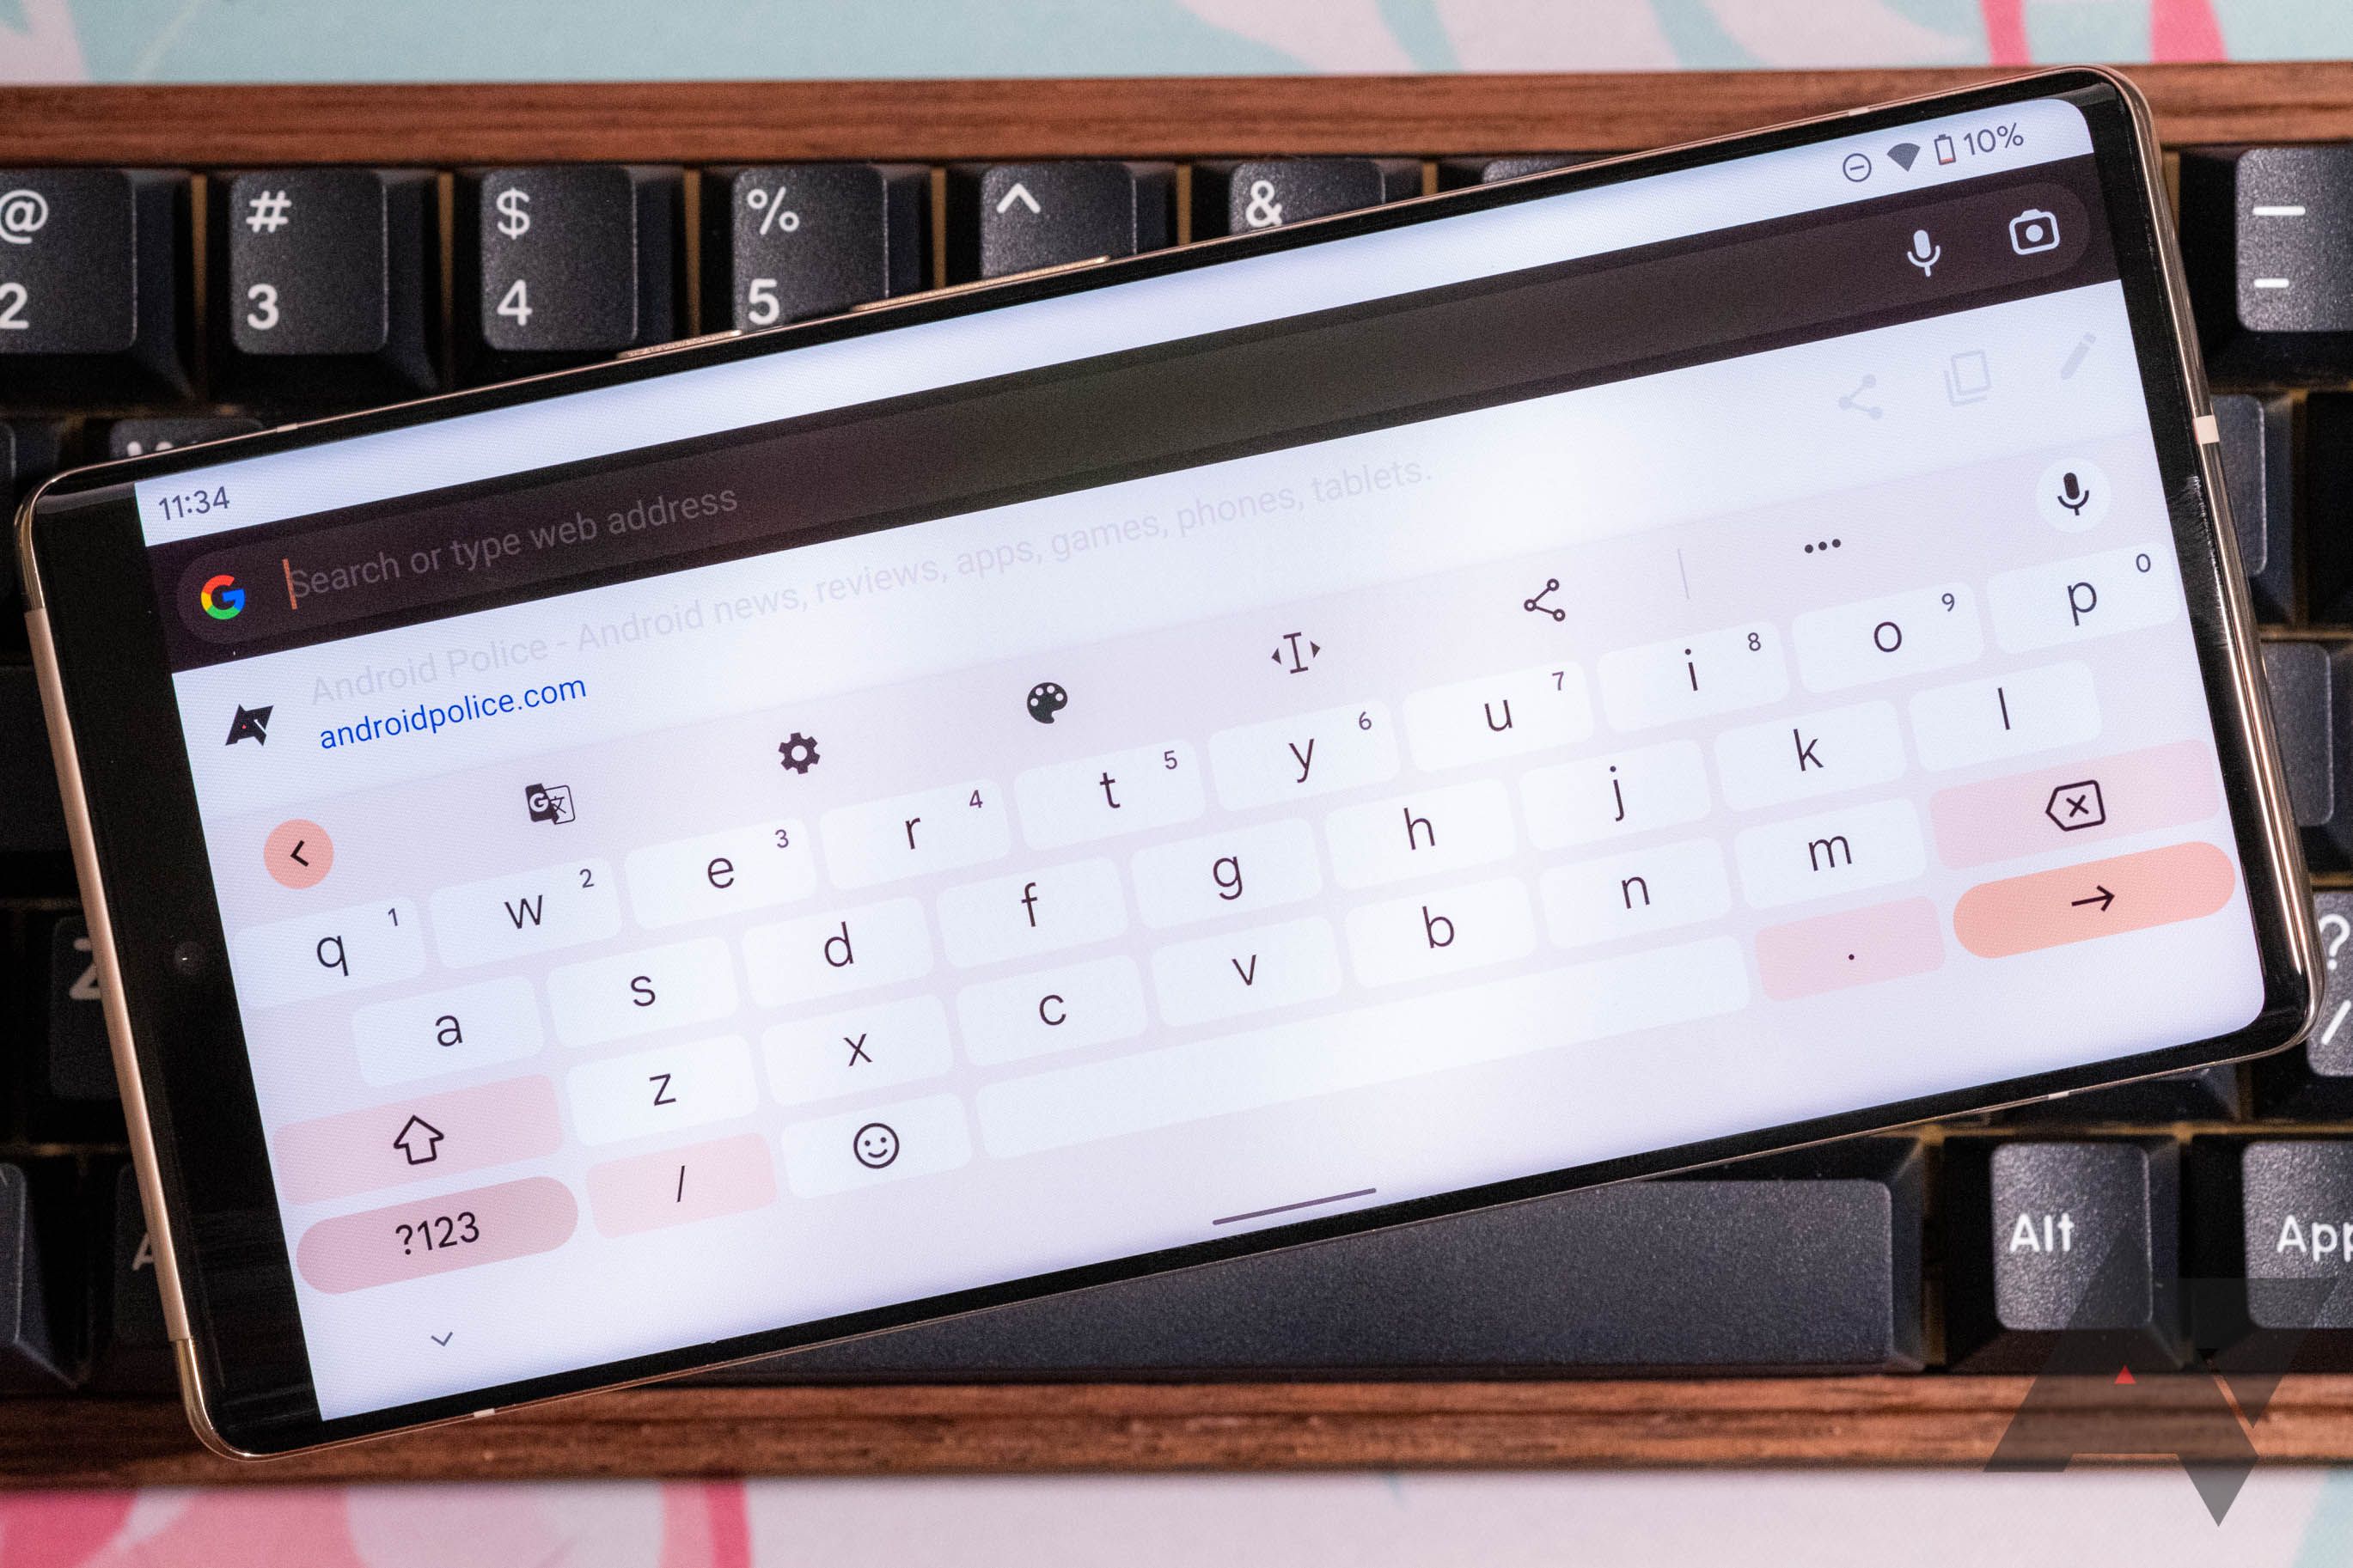 Our 6 favorite Android keyboard apps for quick typing on the go